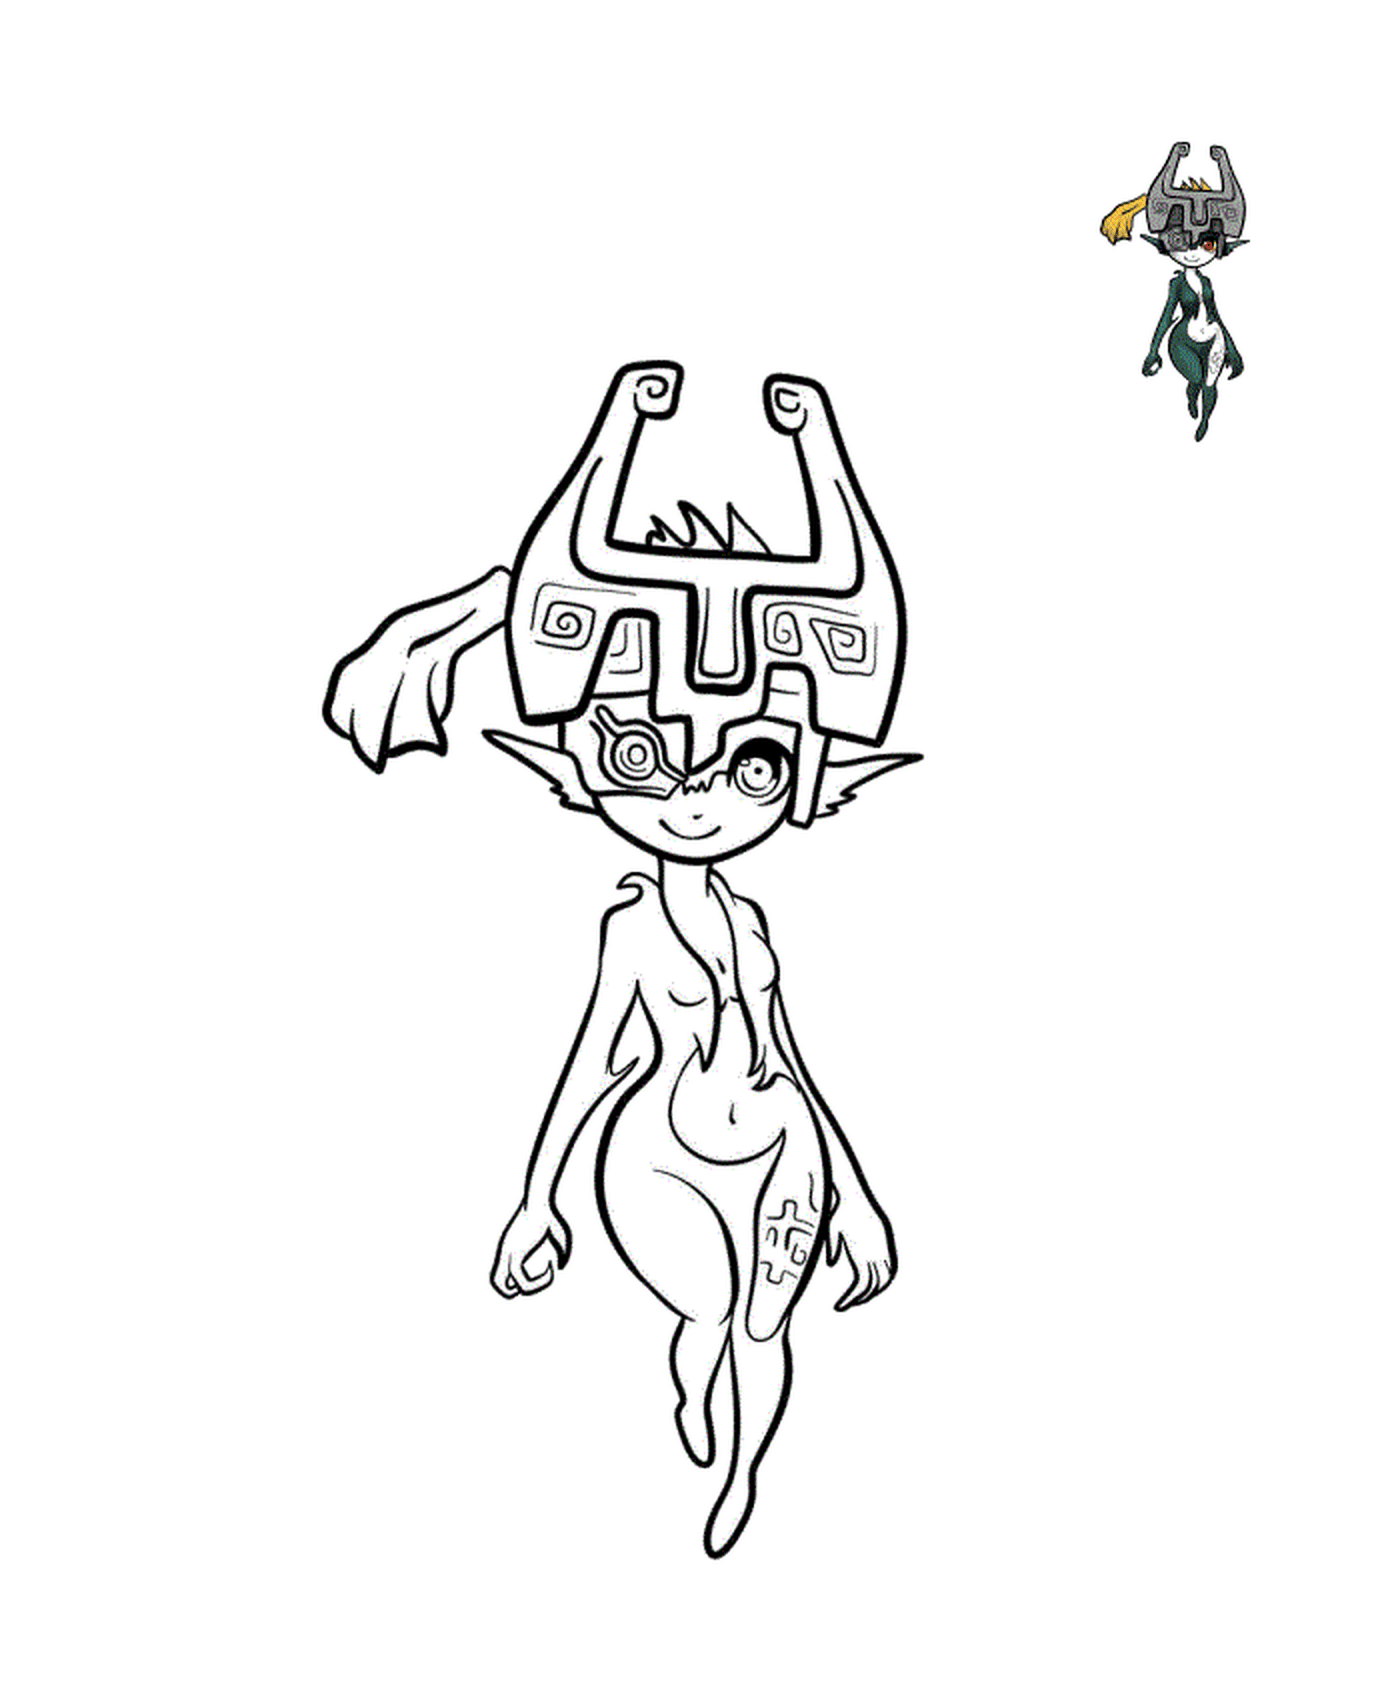  Midna, resident of Twilight Realm 